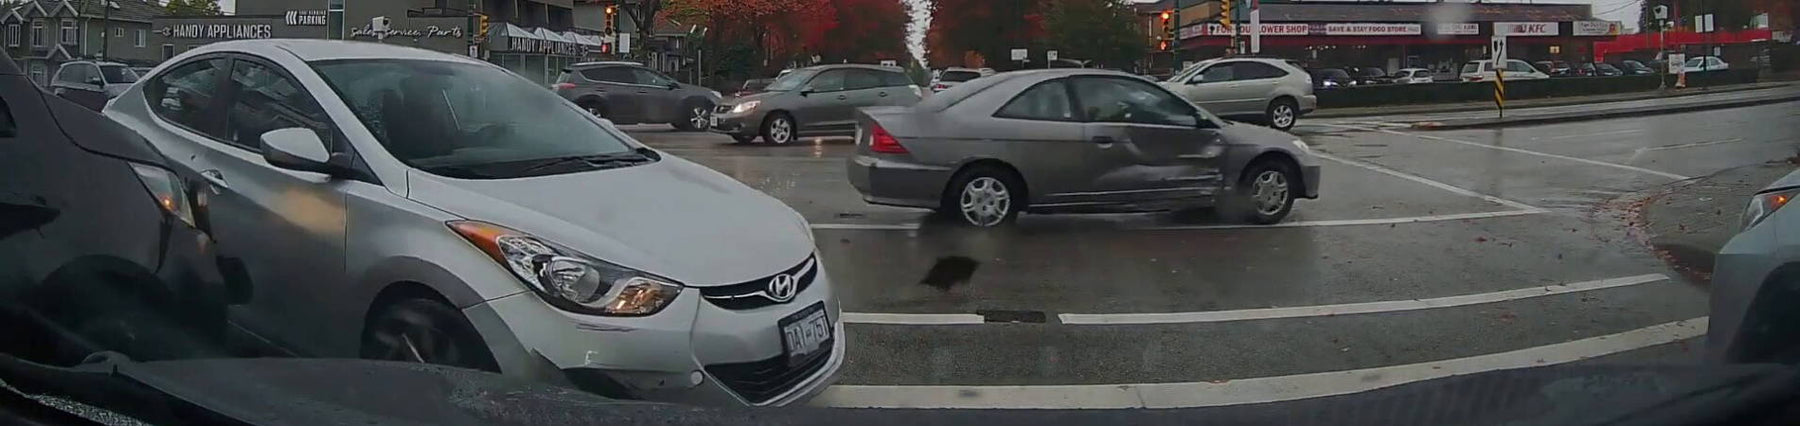 Driver Captures Rough Sideswipe Hit-and-Run Shortly After Installing Dash Cam